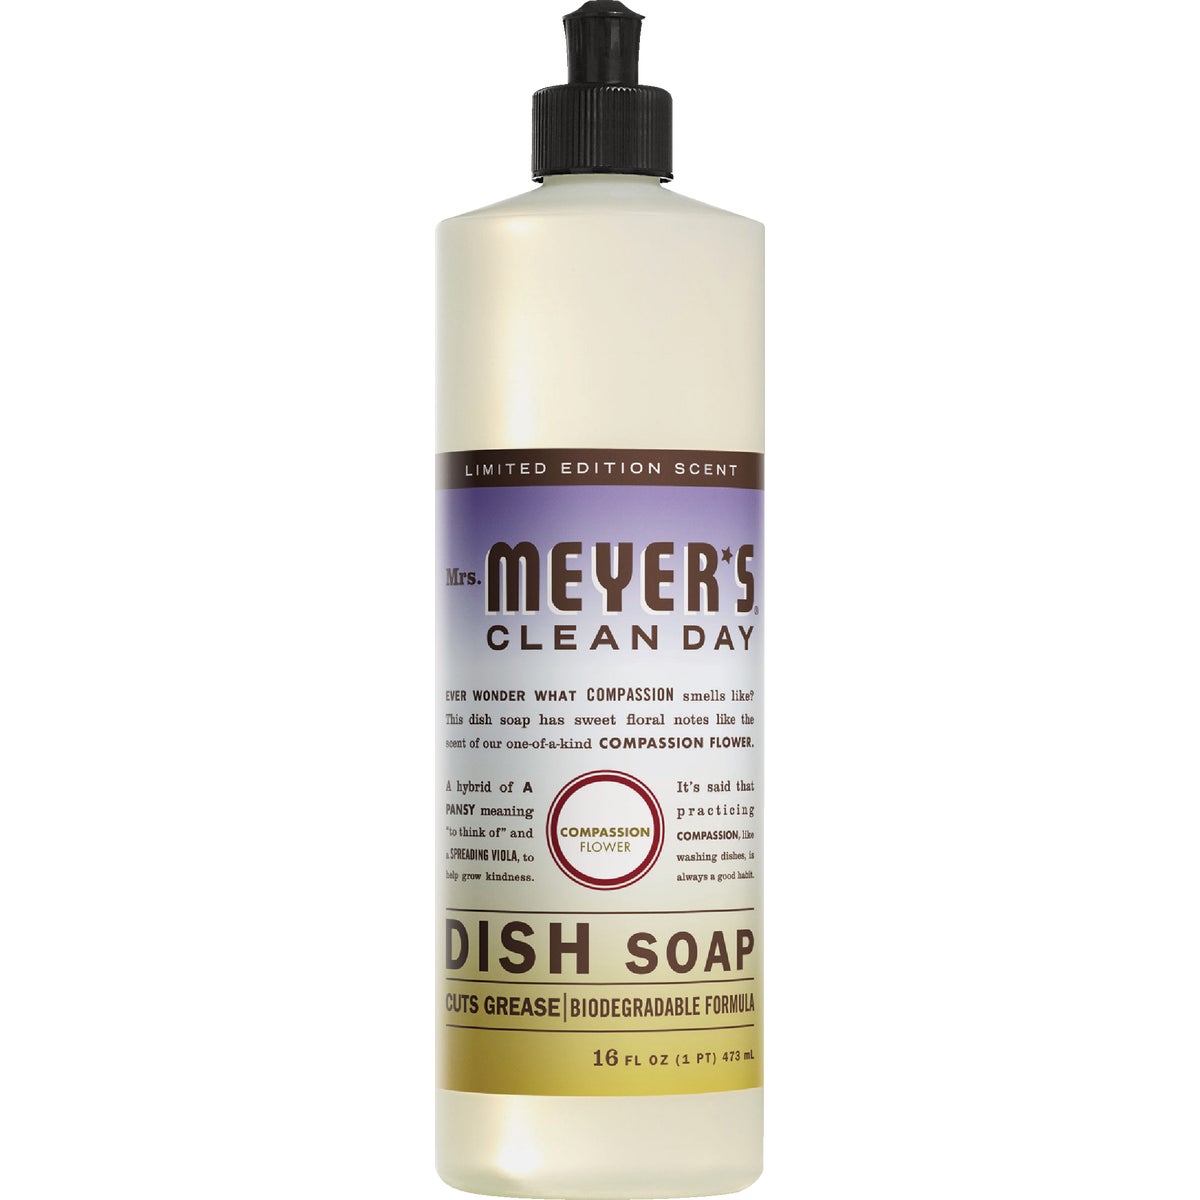 Mrs. Meyer's Clean Day 16 Oz. Compassion Flower Liquid Dish Soap